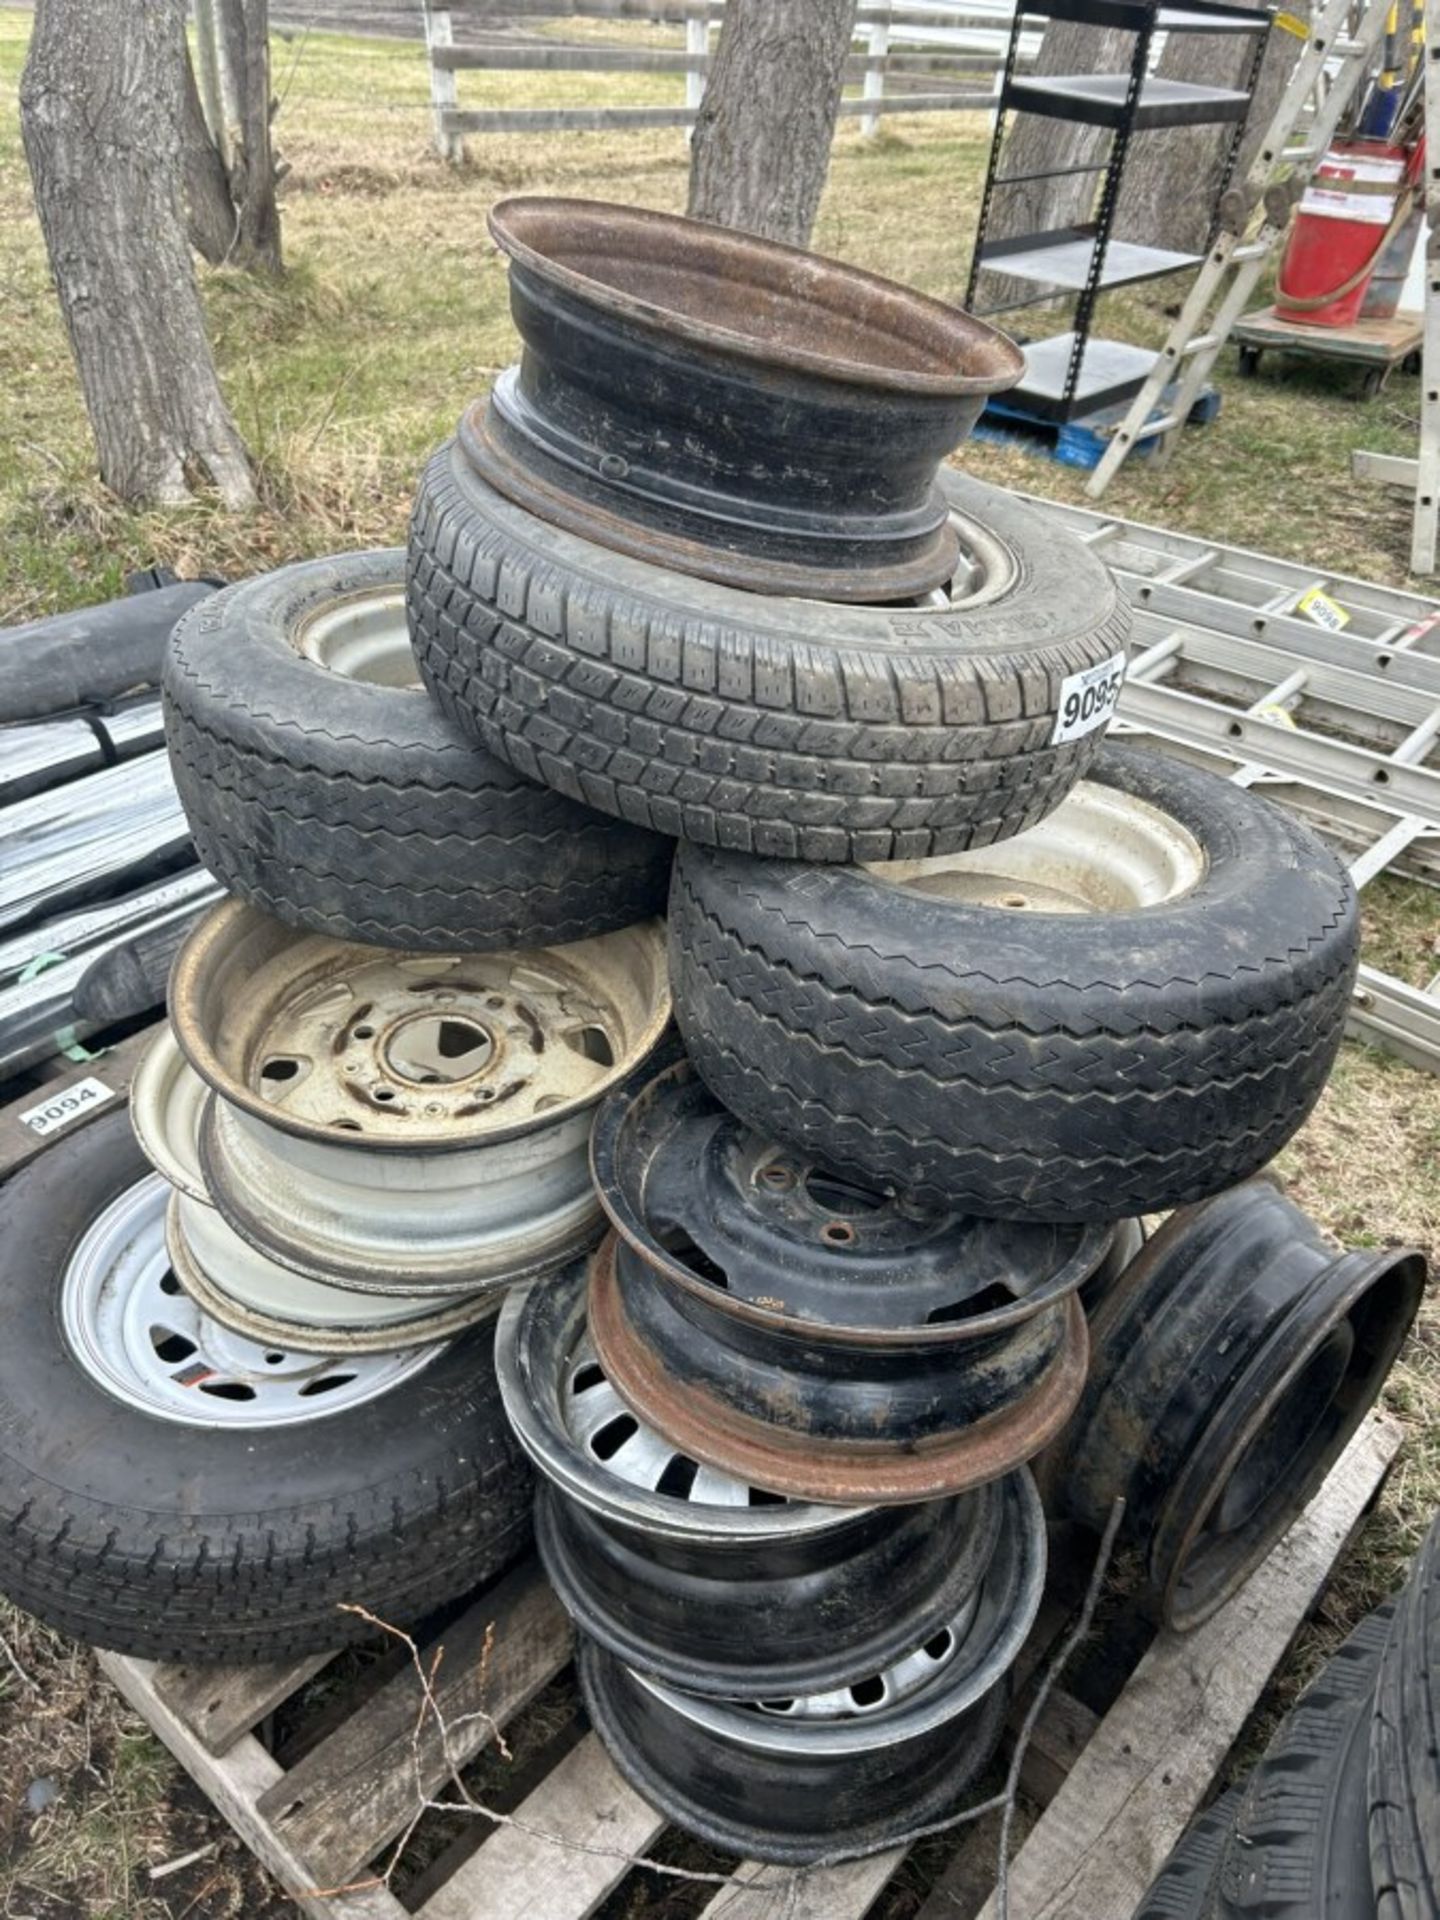 L/O ASSORTED TIRES AND RIMS - Image 3 of 6